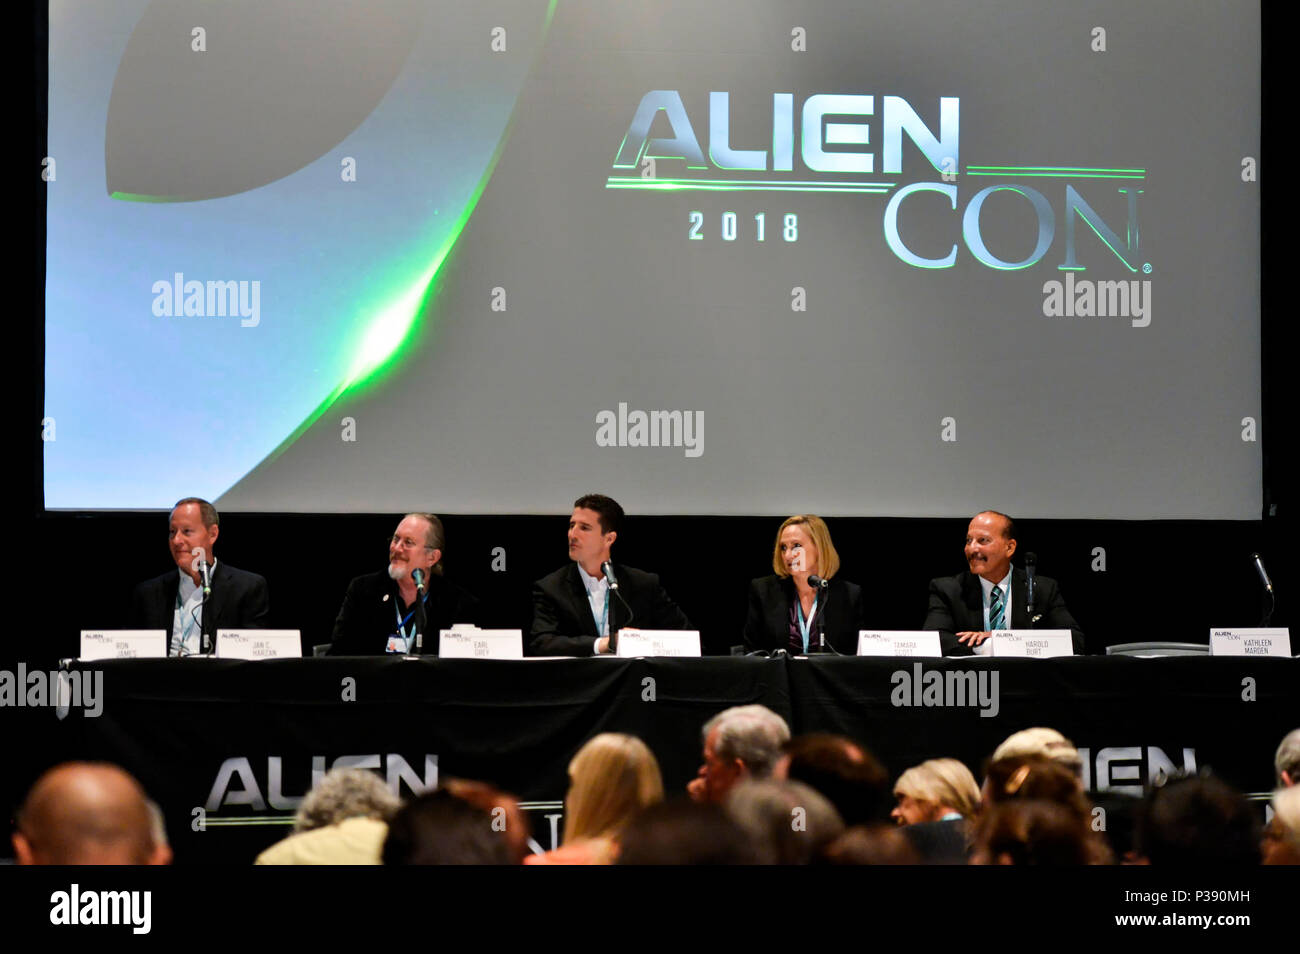 Pasadena, California, June 16, 2018, A panel of experts, Ron James, Earl Grey, Bill Crowley, Tamara Scott and Harold Burt hold a discussion on UFO sightings around the world at AlienCon day 2. Credit: Ken Howard Images/Alamy Live News Stock Photo